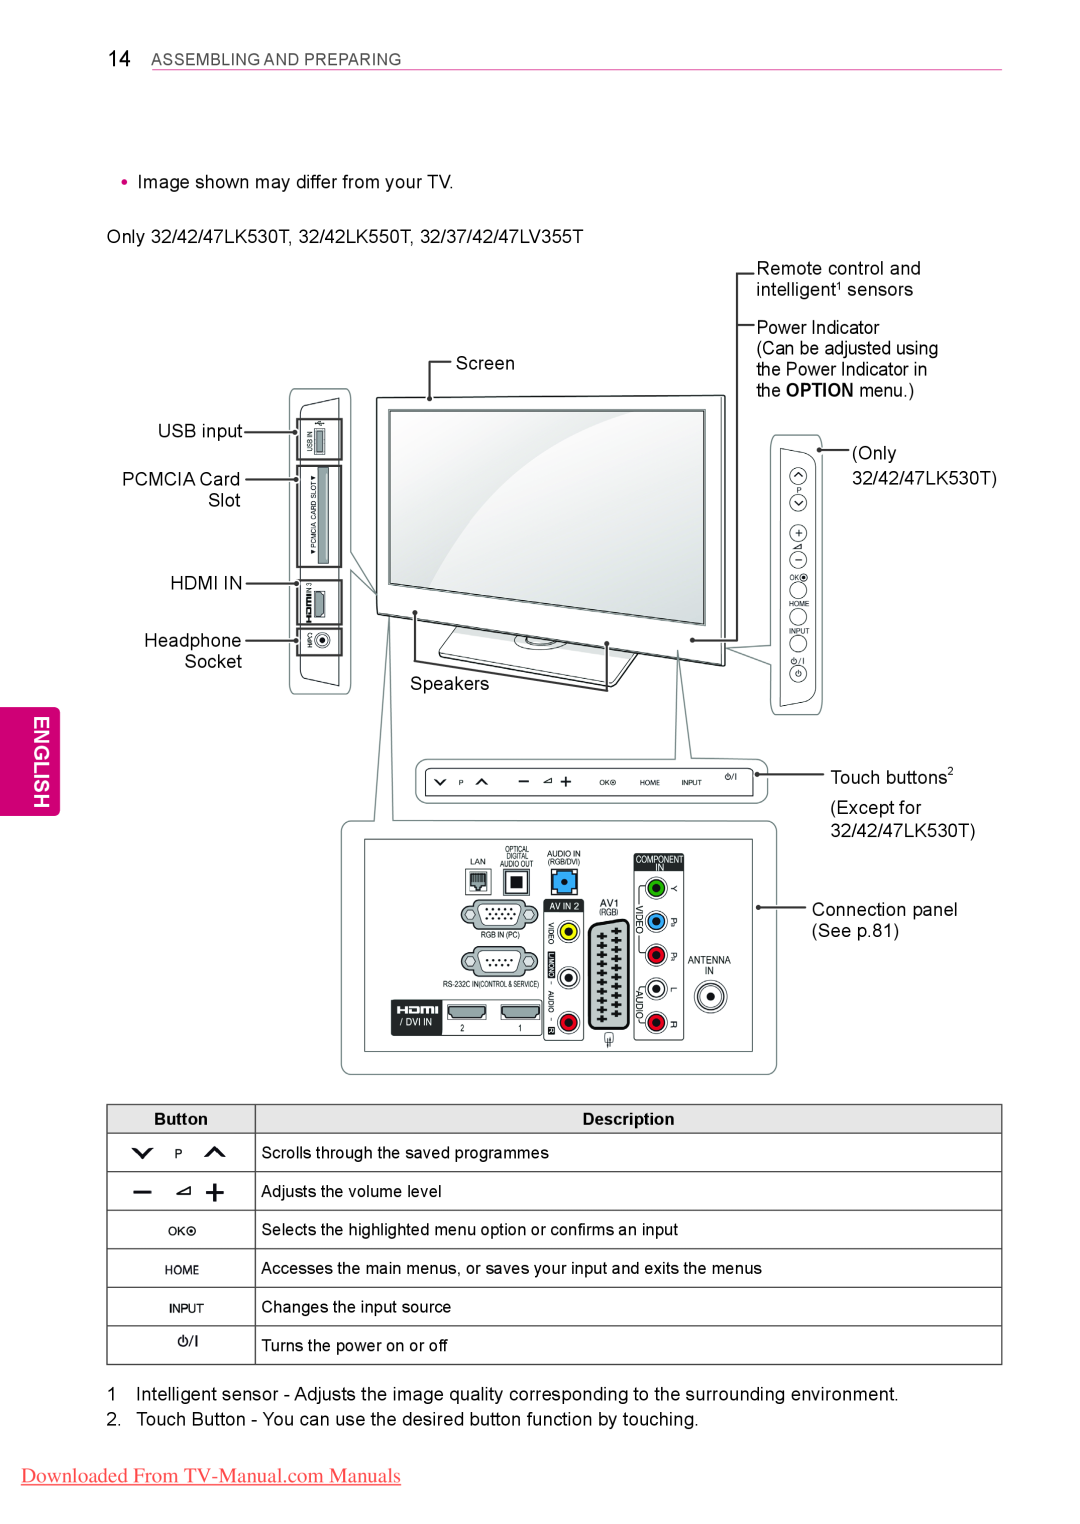 LG Electronics 60PV25**, 50/60PZ55**, 50/60PZ25** English, Downloaded From TV-Manual.com Manuals, Assembling And Preparing 